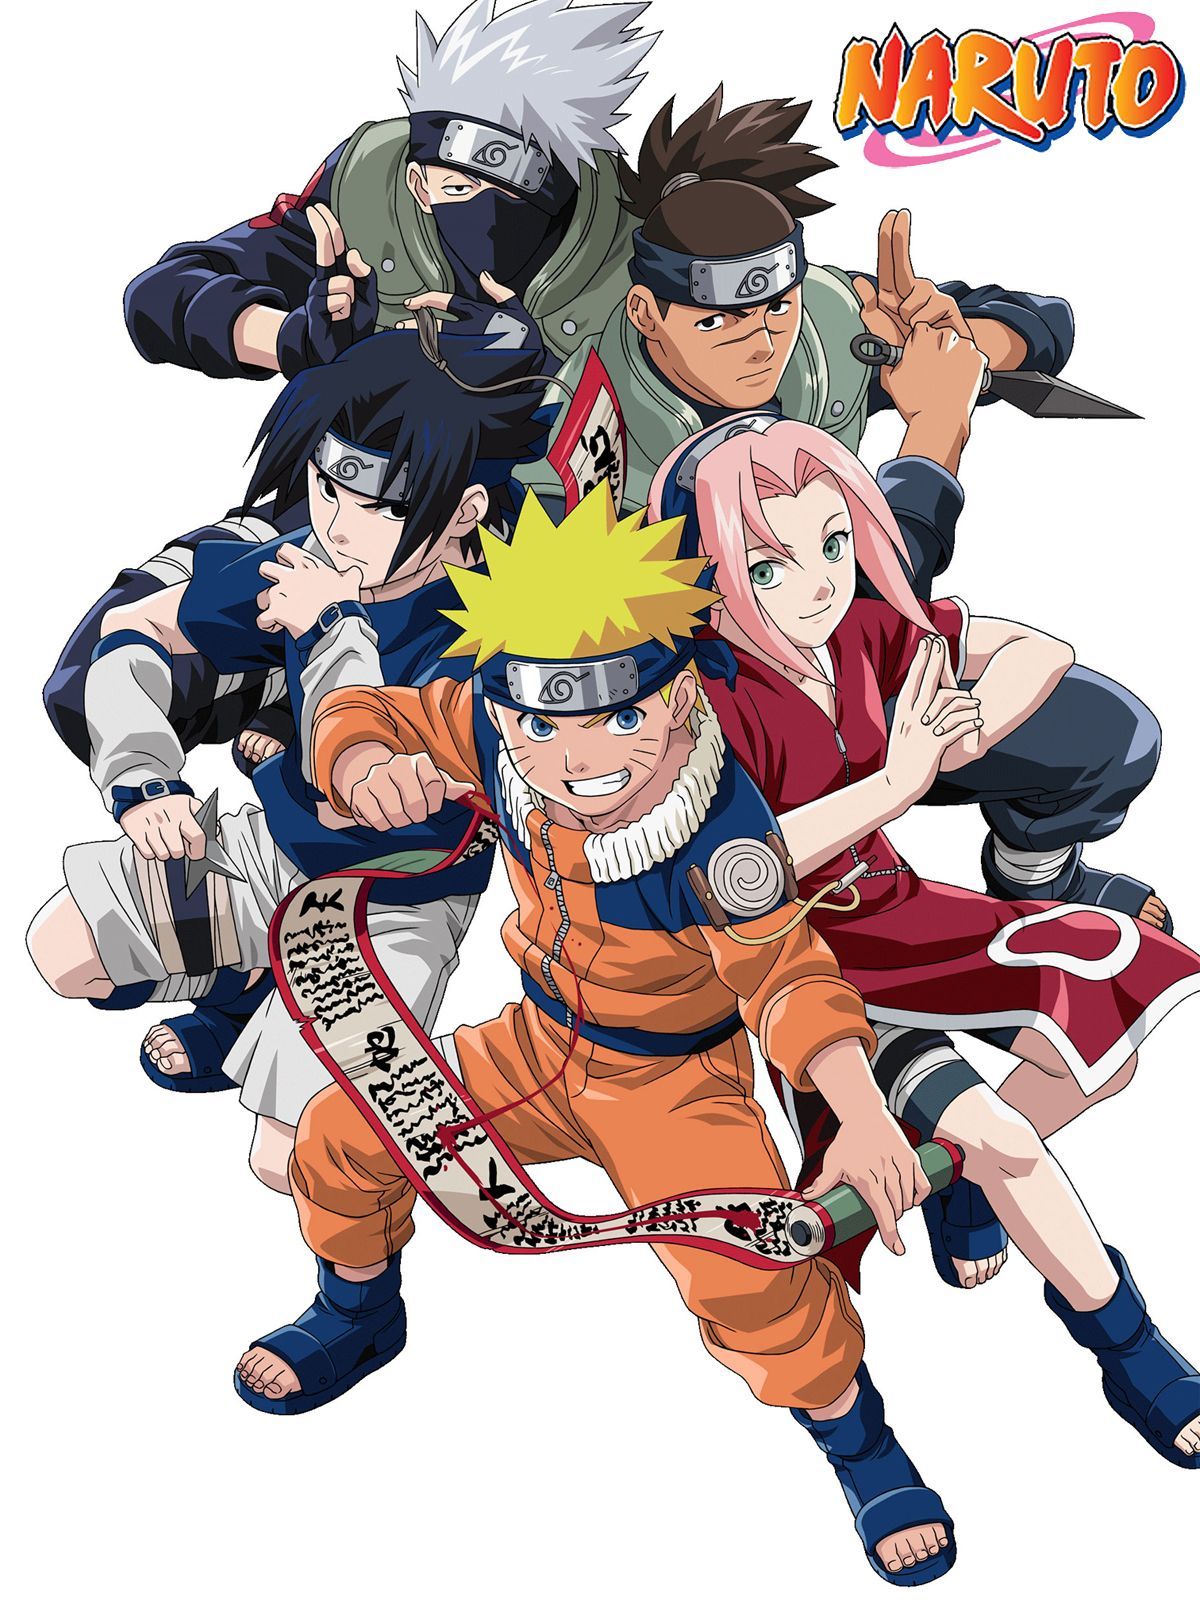 Naruto TV Show: News, Videos, Full Episodes and More